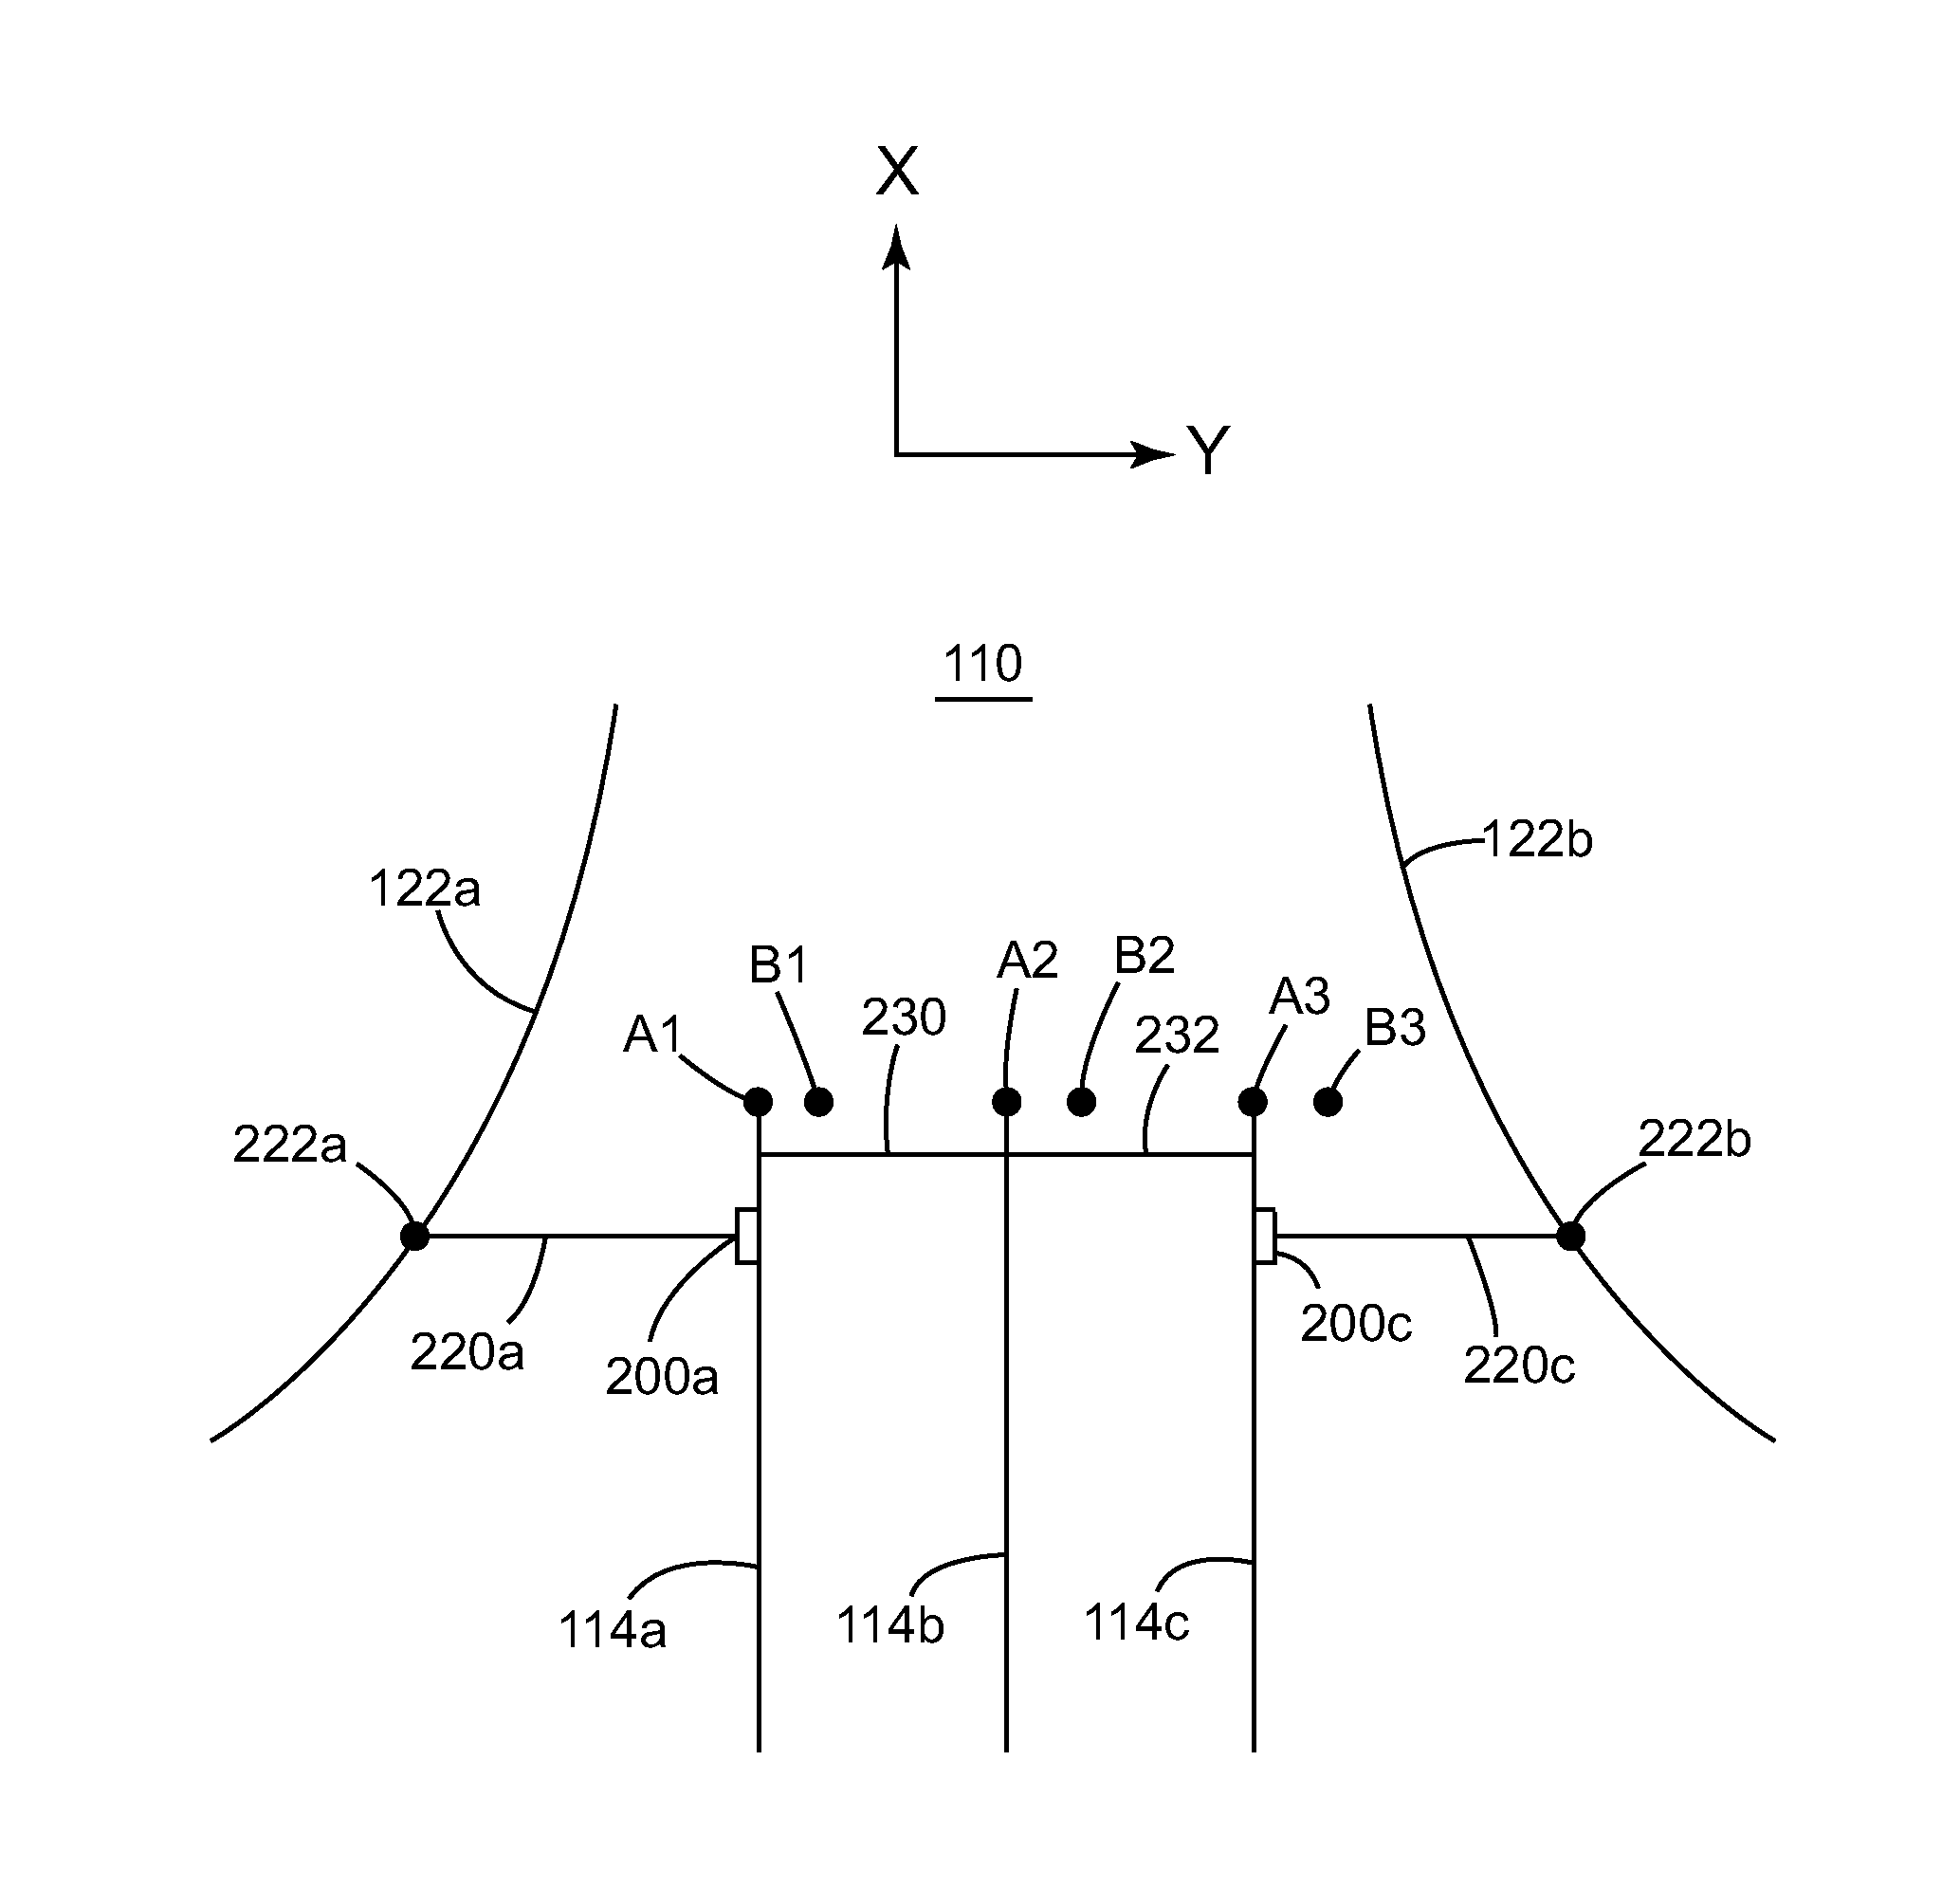 Steerable source array and method